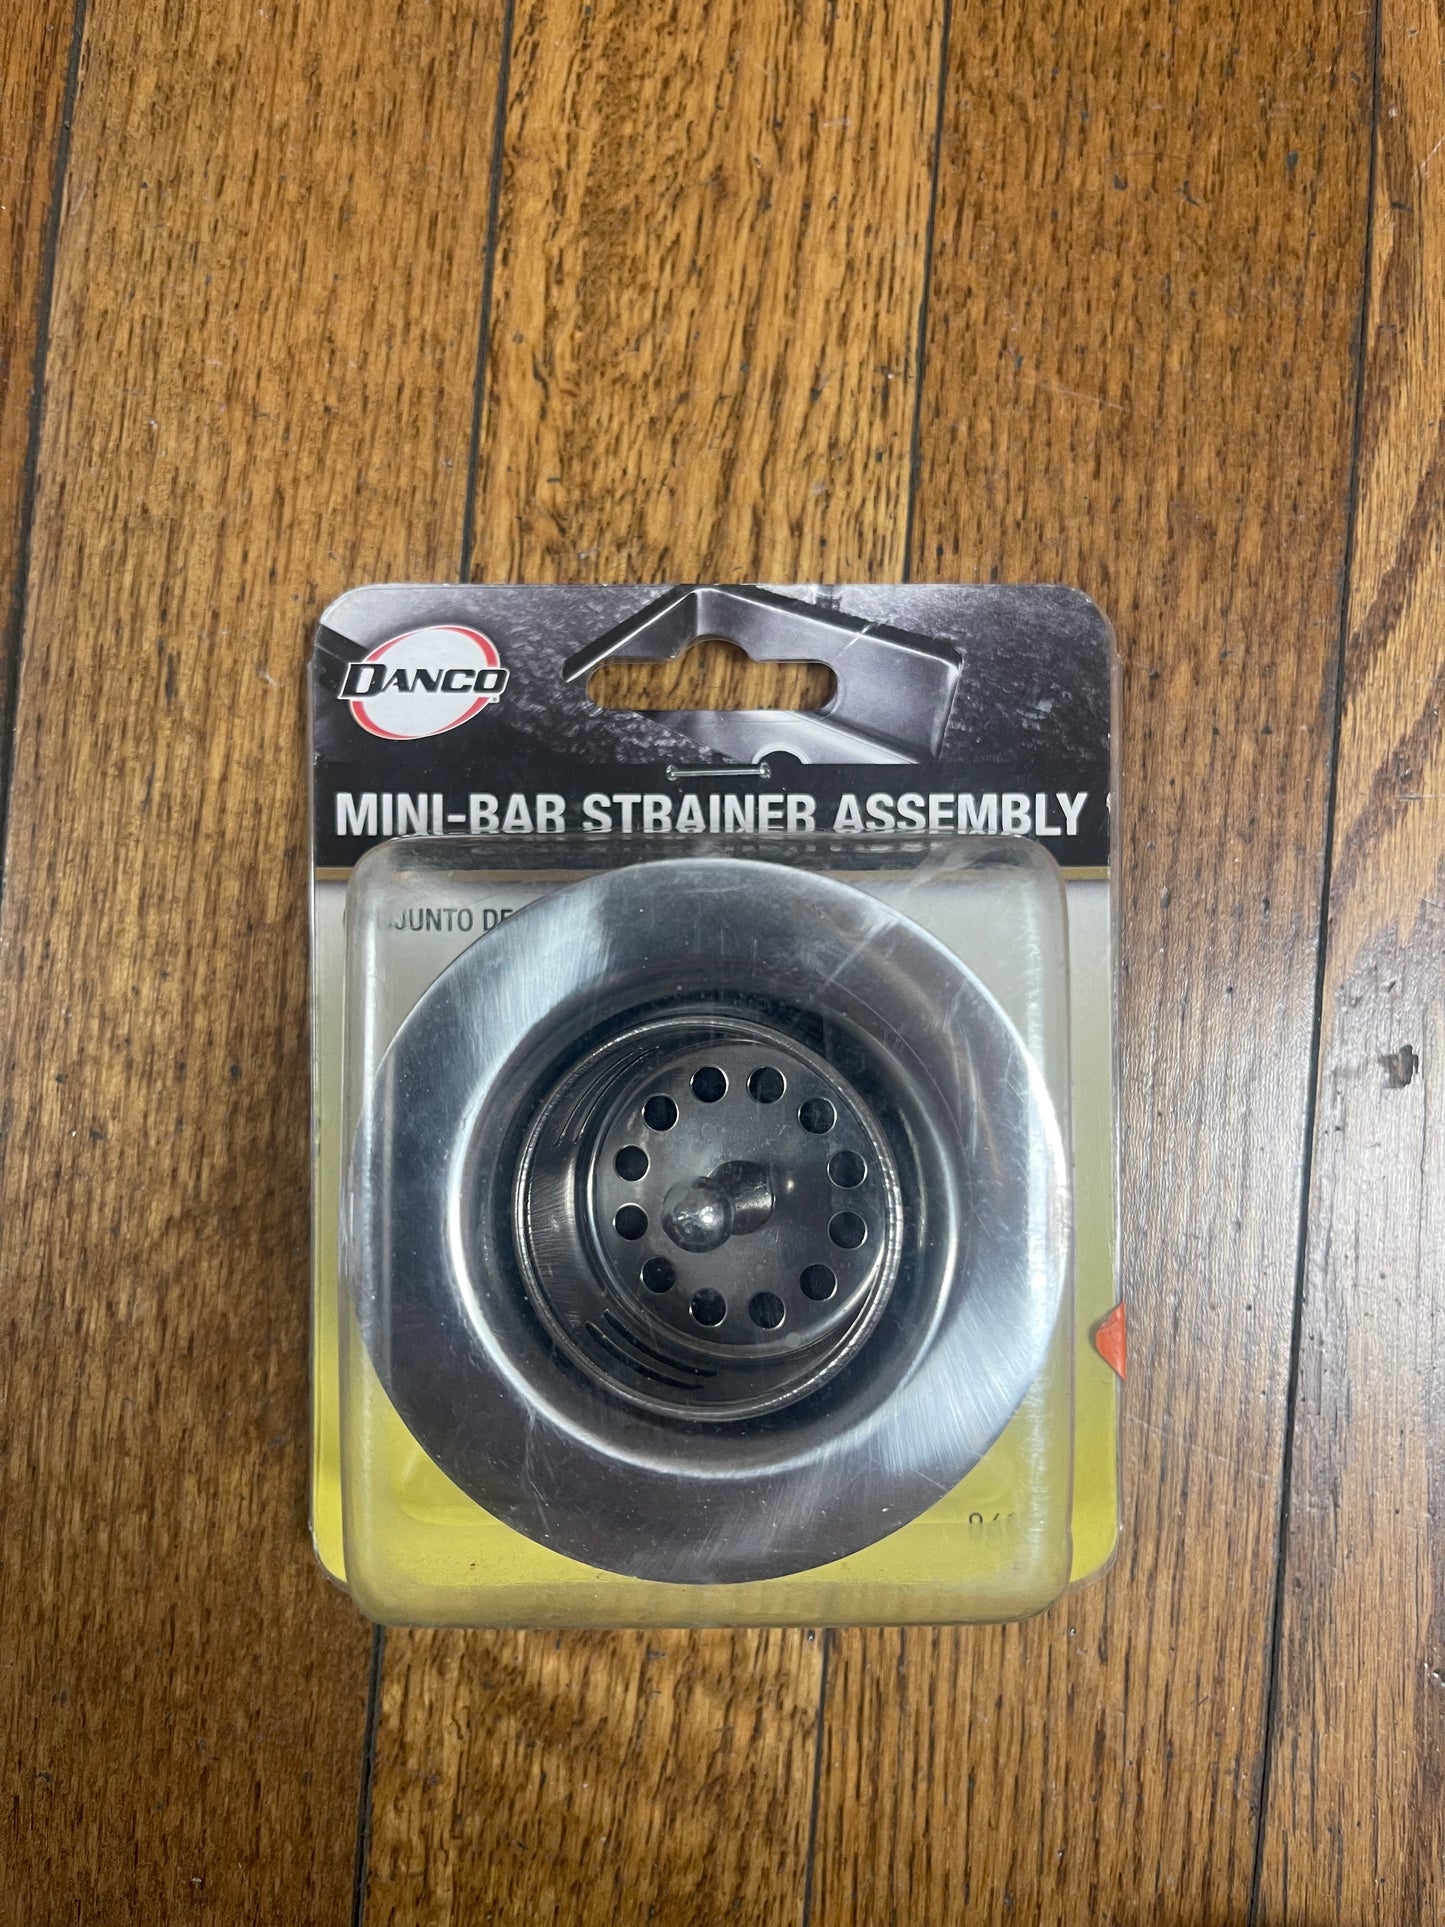 Danco Duo Basket Strainer Assembly Damaged Box